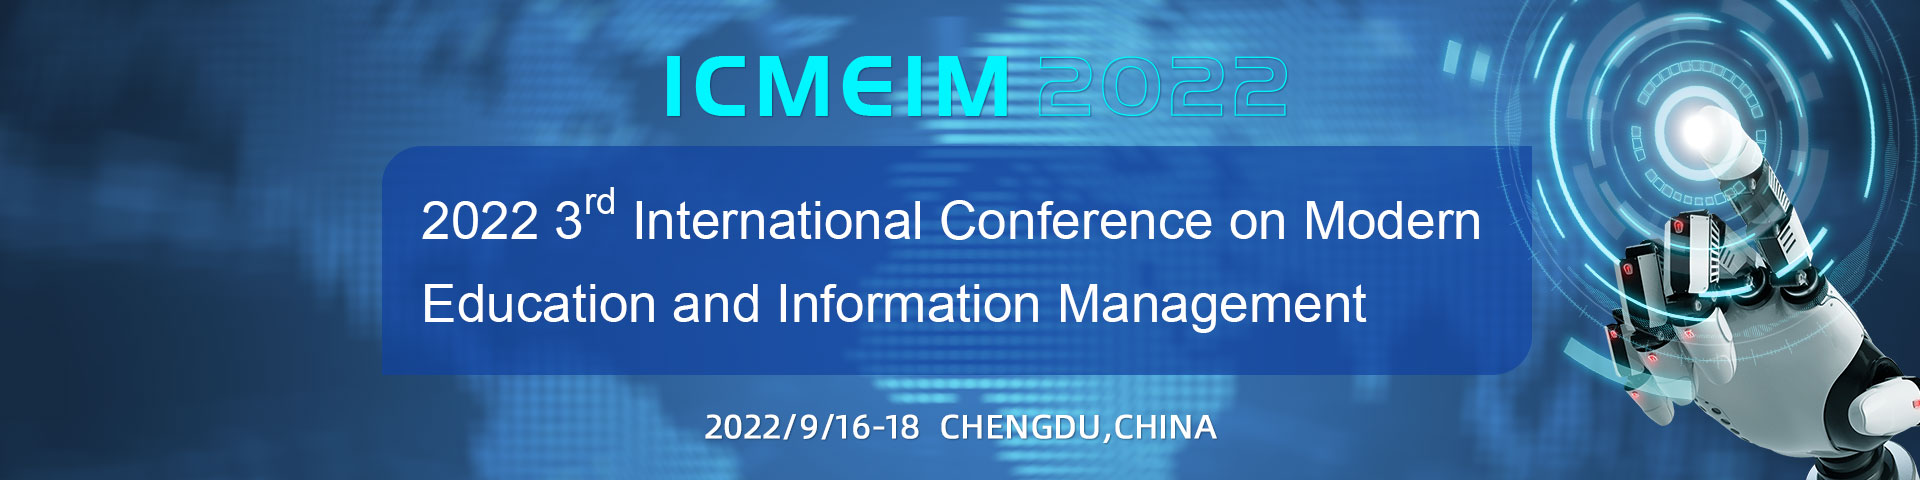 2022 3rd International Conference on Modern Education and Information Management (ICMEIM 2022), Chengdu, Sichuan, China